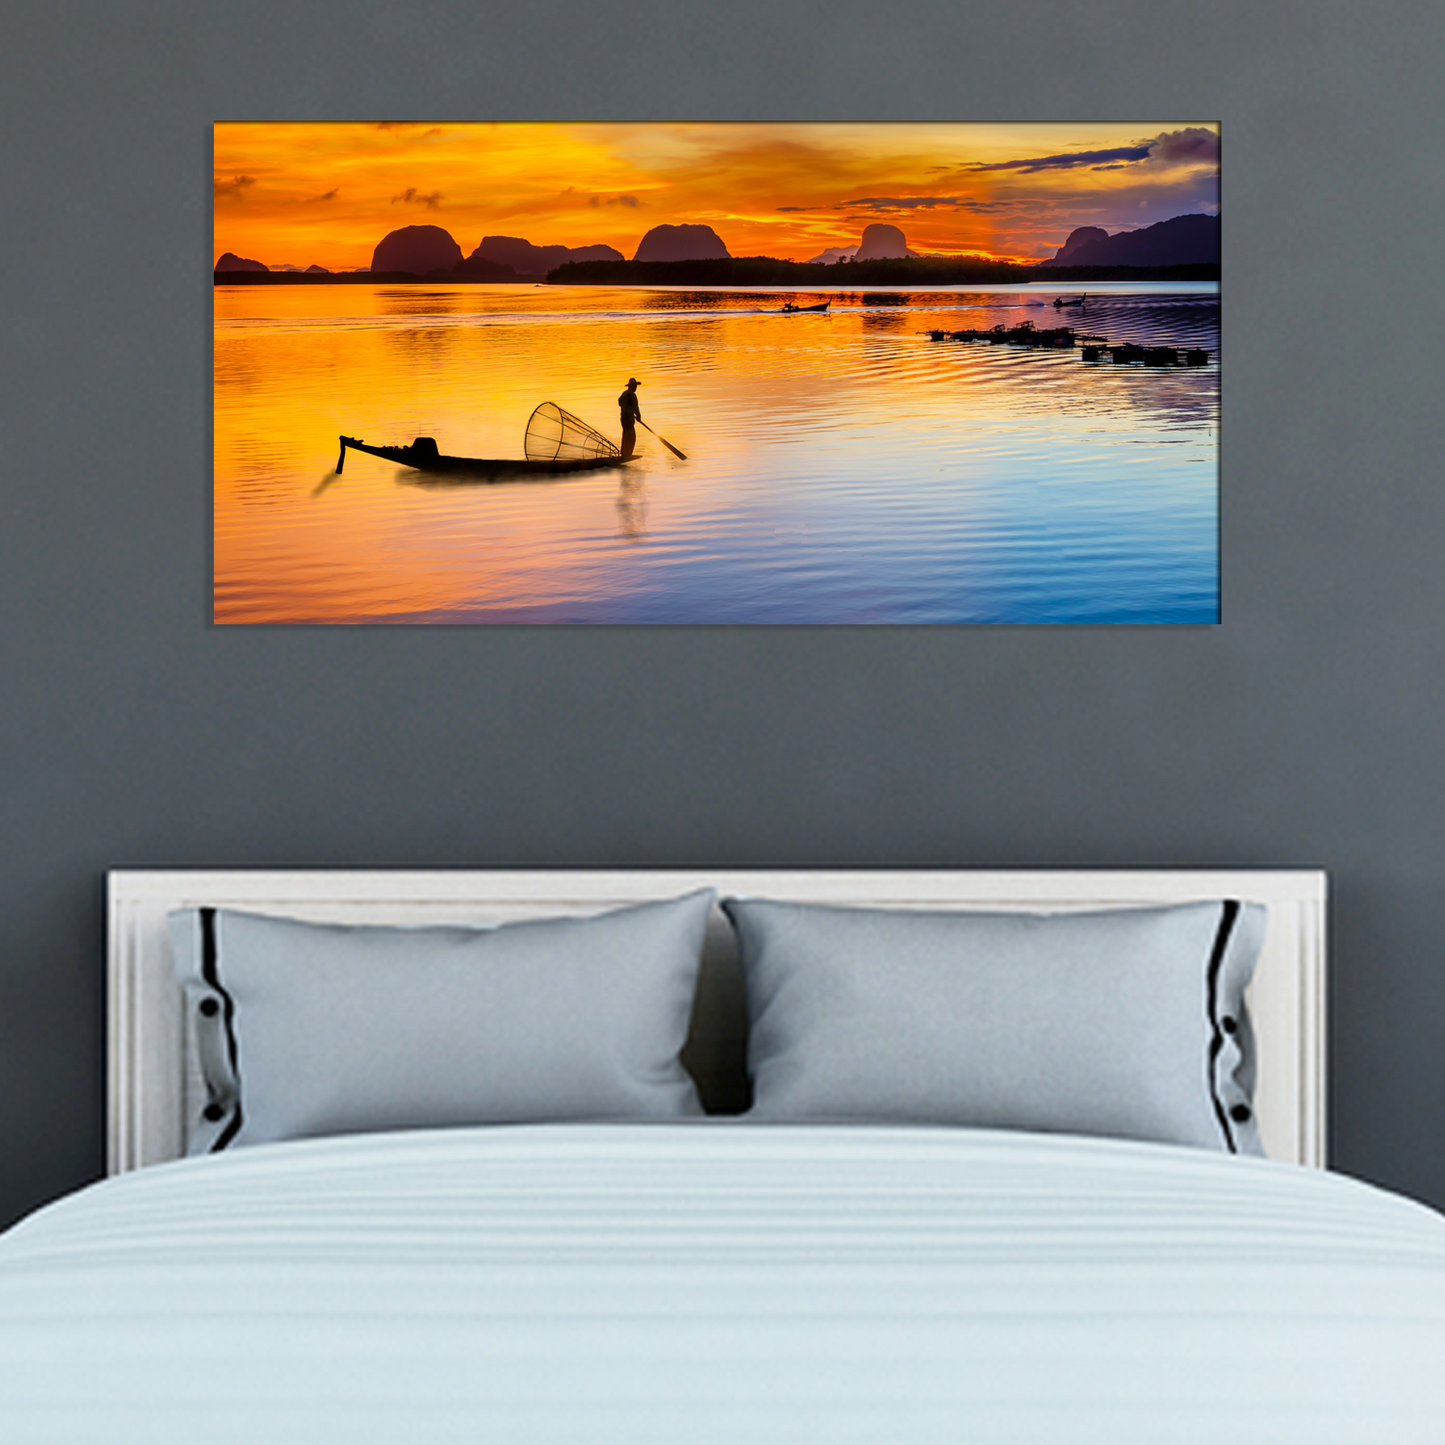 Sunset River View Canvas Print Wall Painting